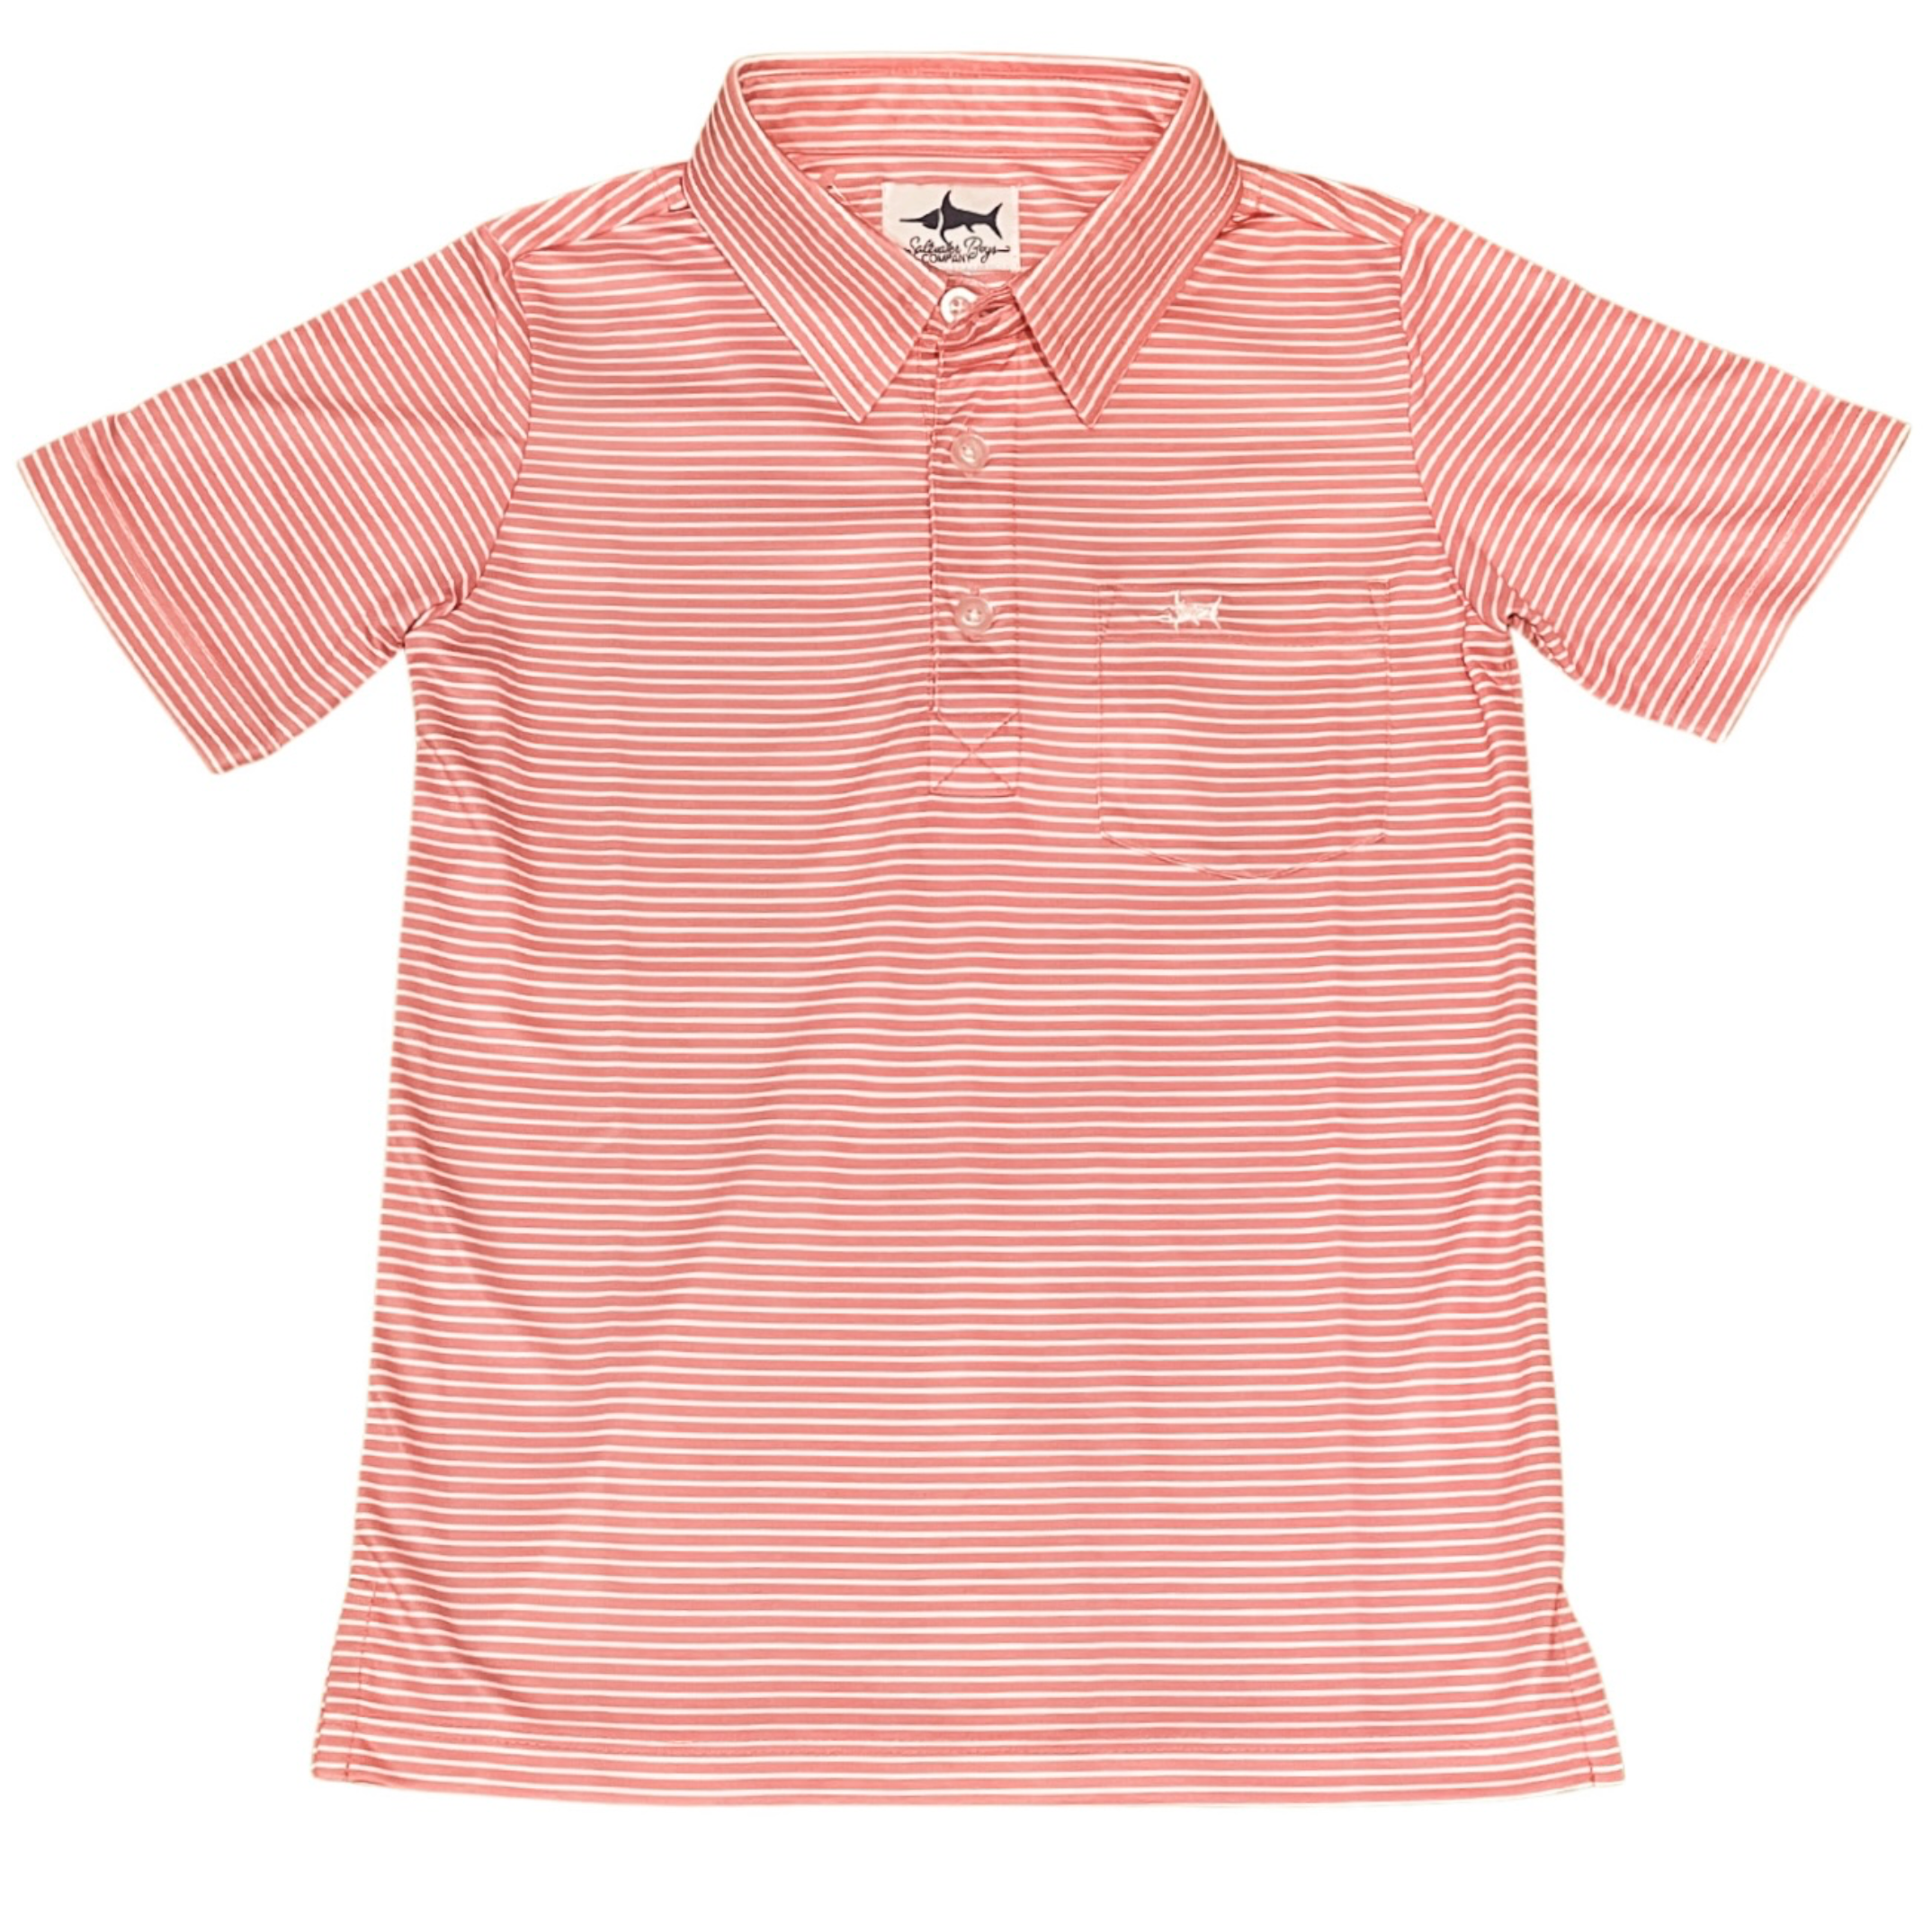 Saltwater Boys Company - White Offshore Fishing Polo 3T